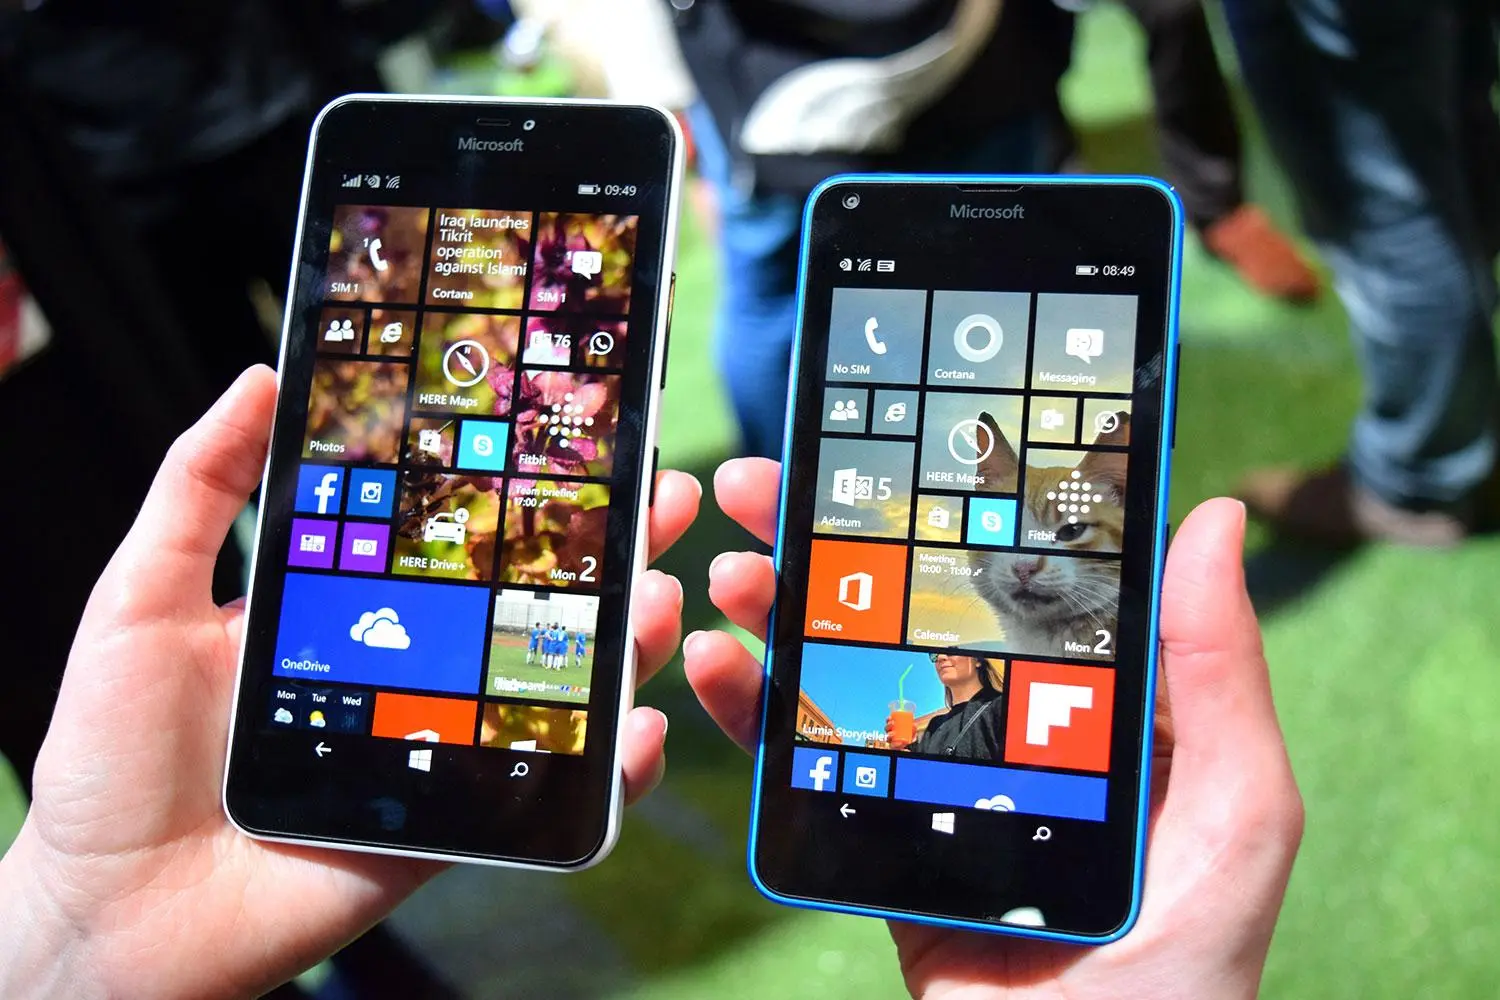 Microsoft to Launch Dual SIM Lumia 640 and Lumia 640 XL Smartphones in India This April